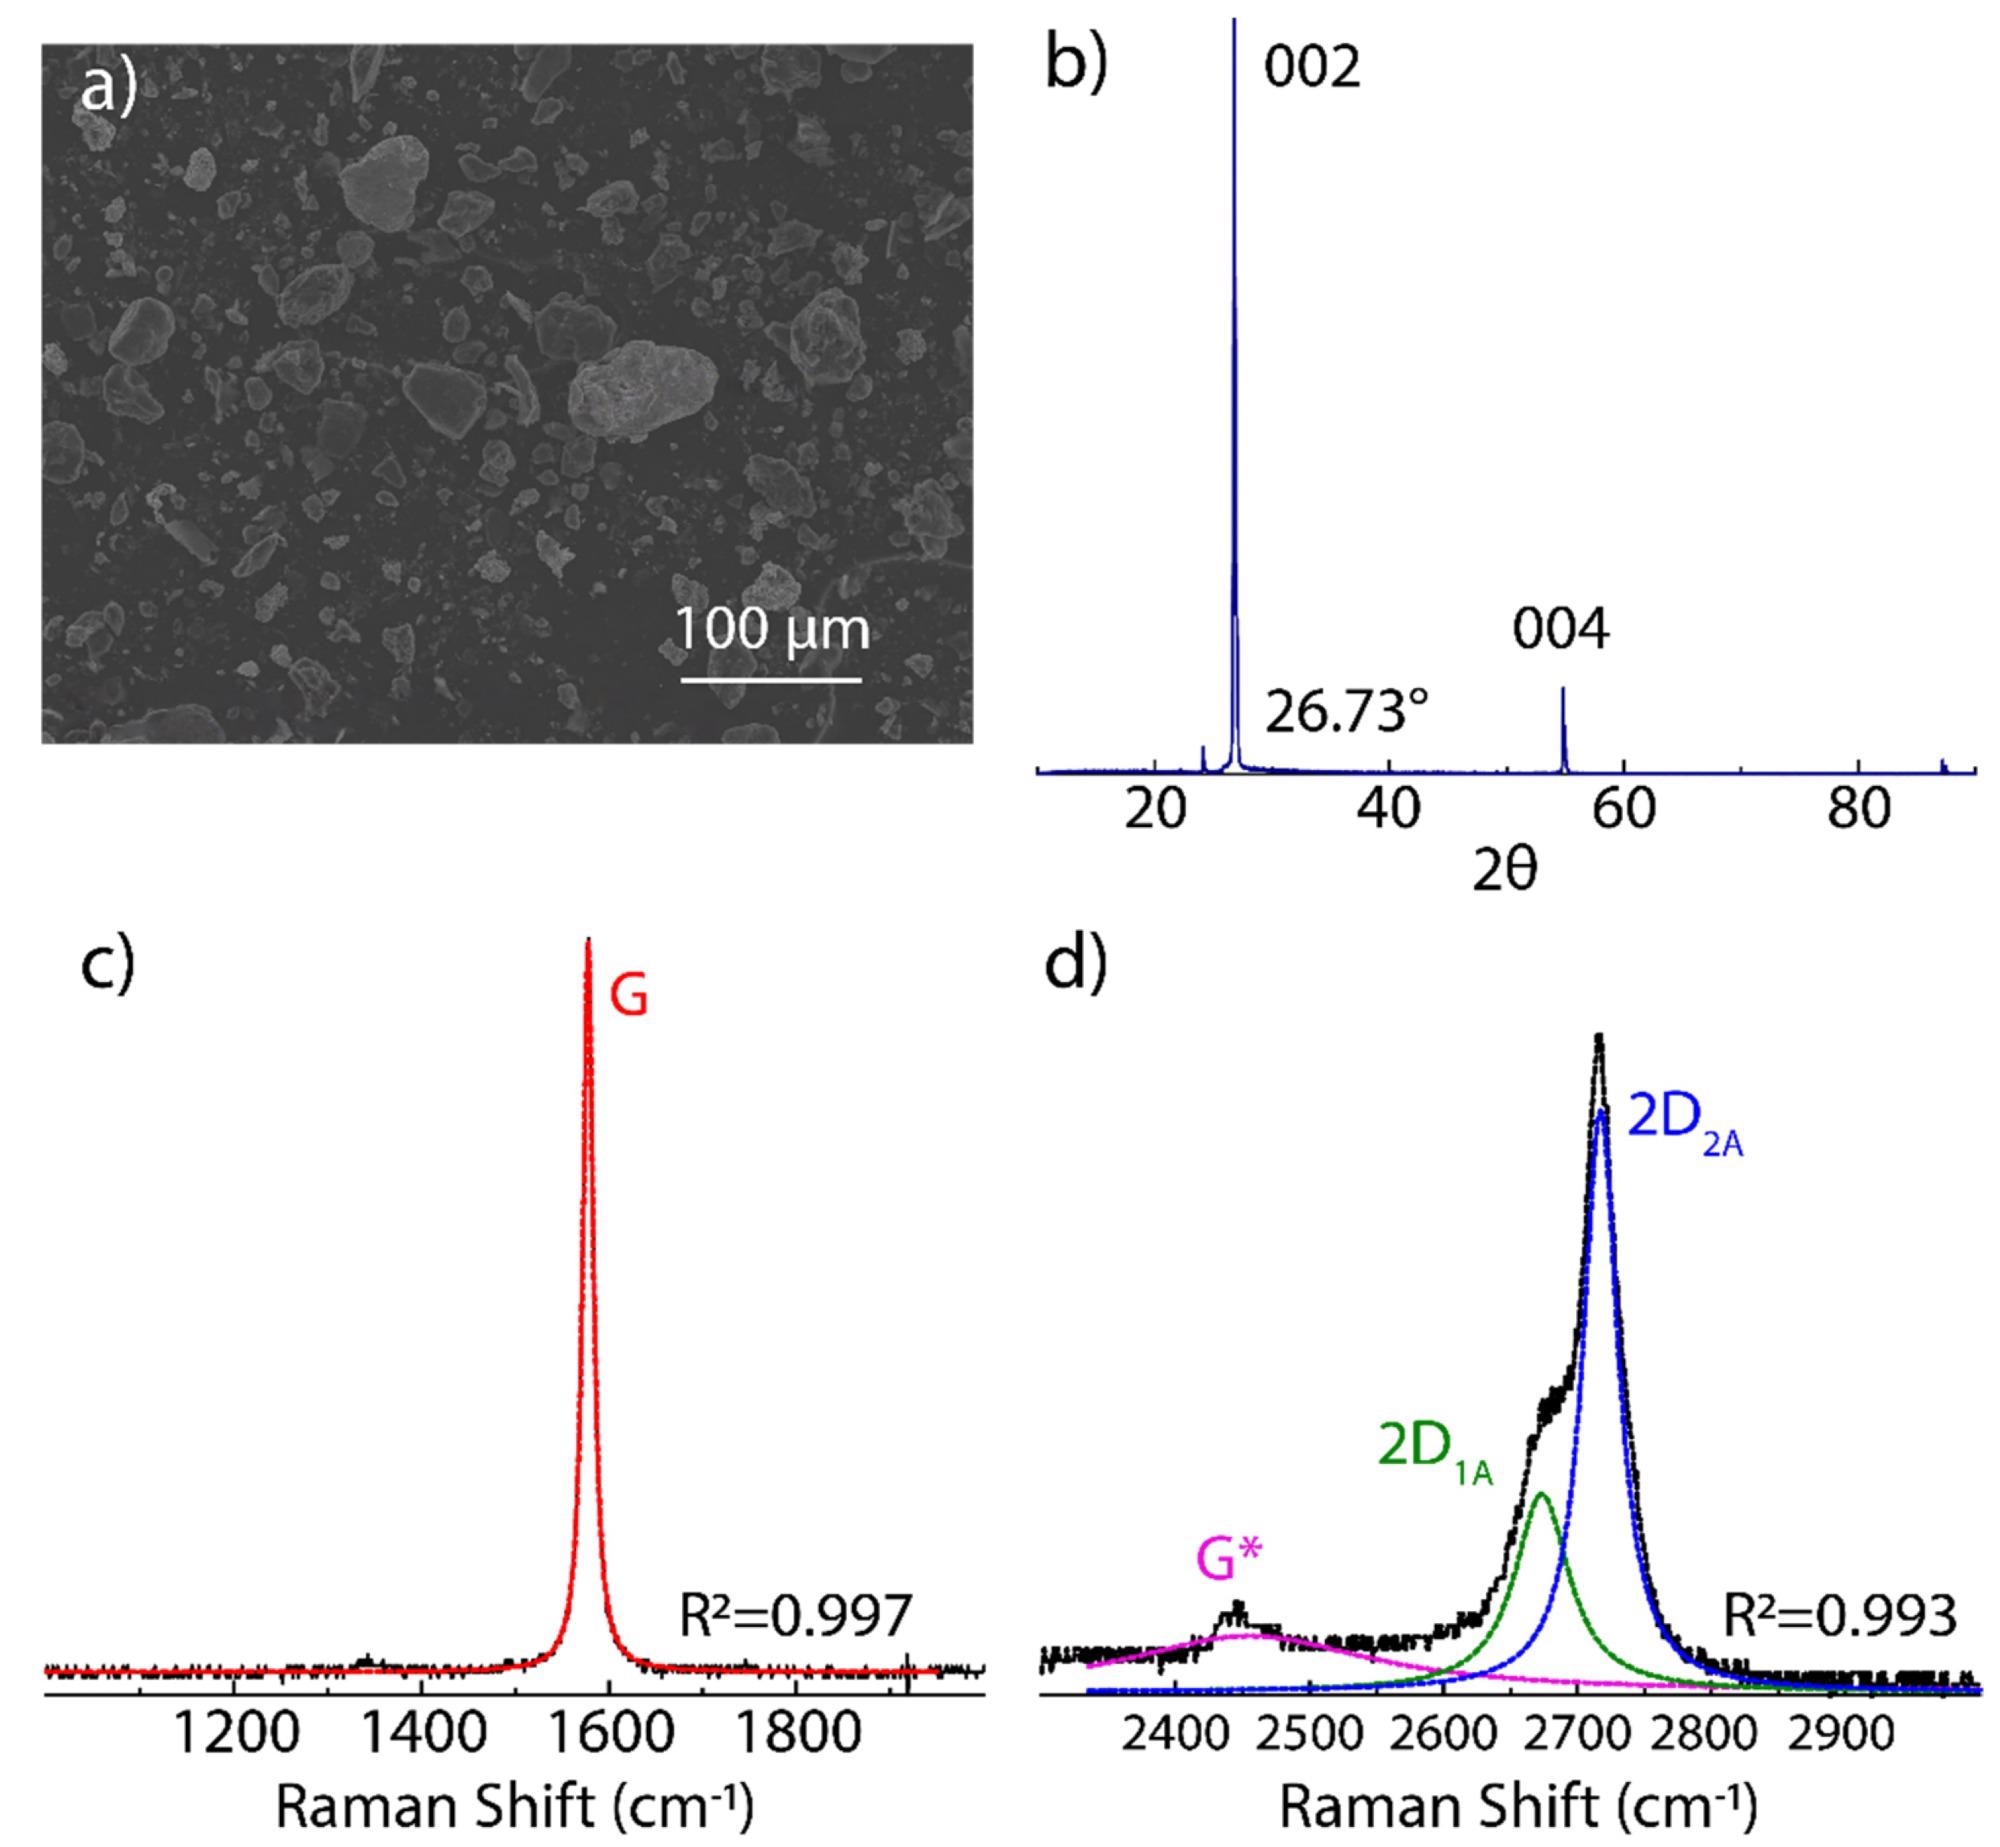 Characterization of starting graphite source: (a) SEM morphology, (b) XRD measurement, and (c,d) Raman spectrum from 1000 to 3000 cm-1 recorded using 532 excitation laser. The intensity was normalized by the most intense peak. The Raman spectrum was fitted using Lorentzian functions.